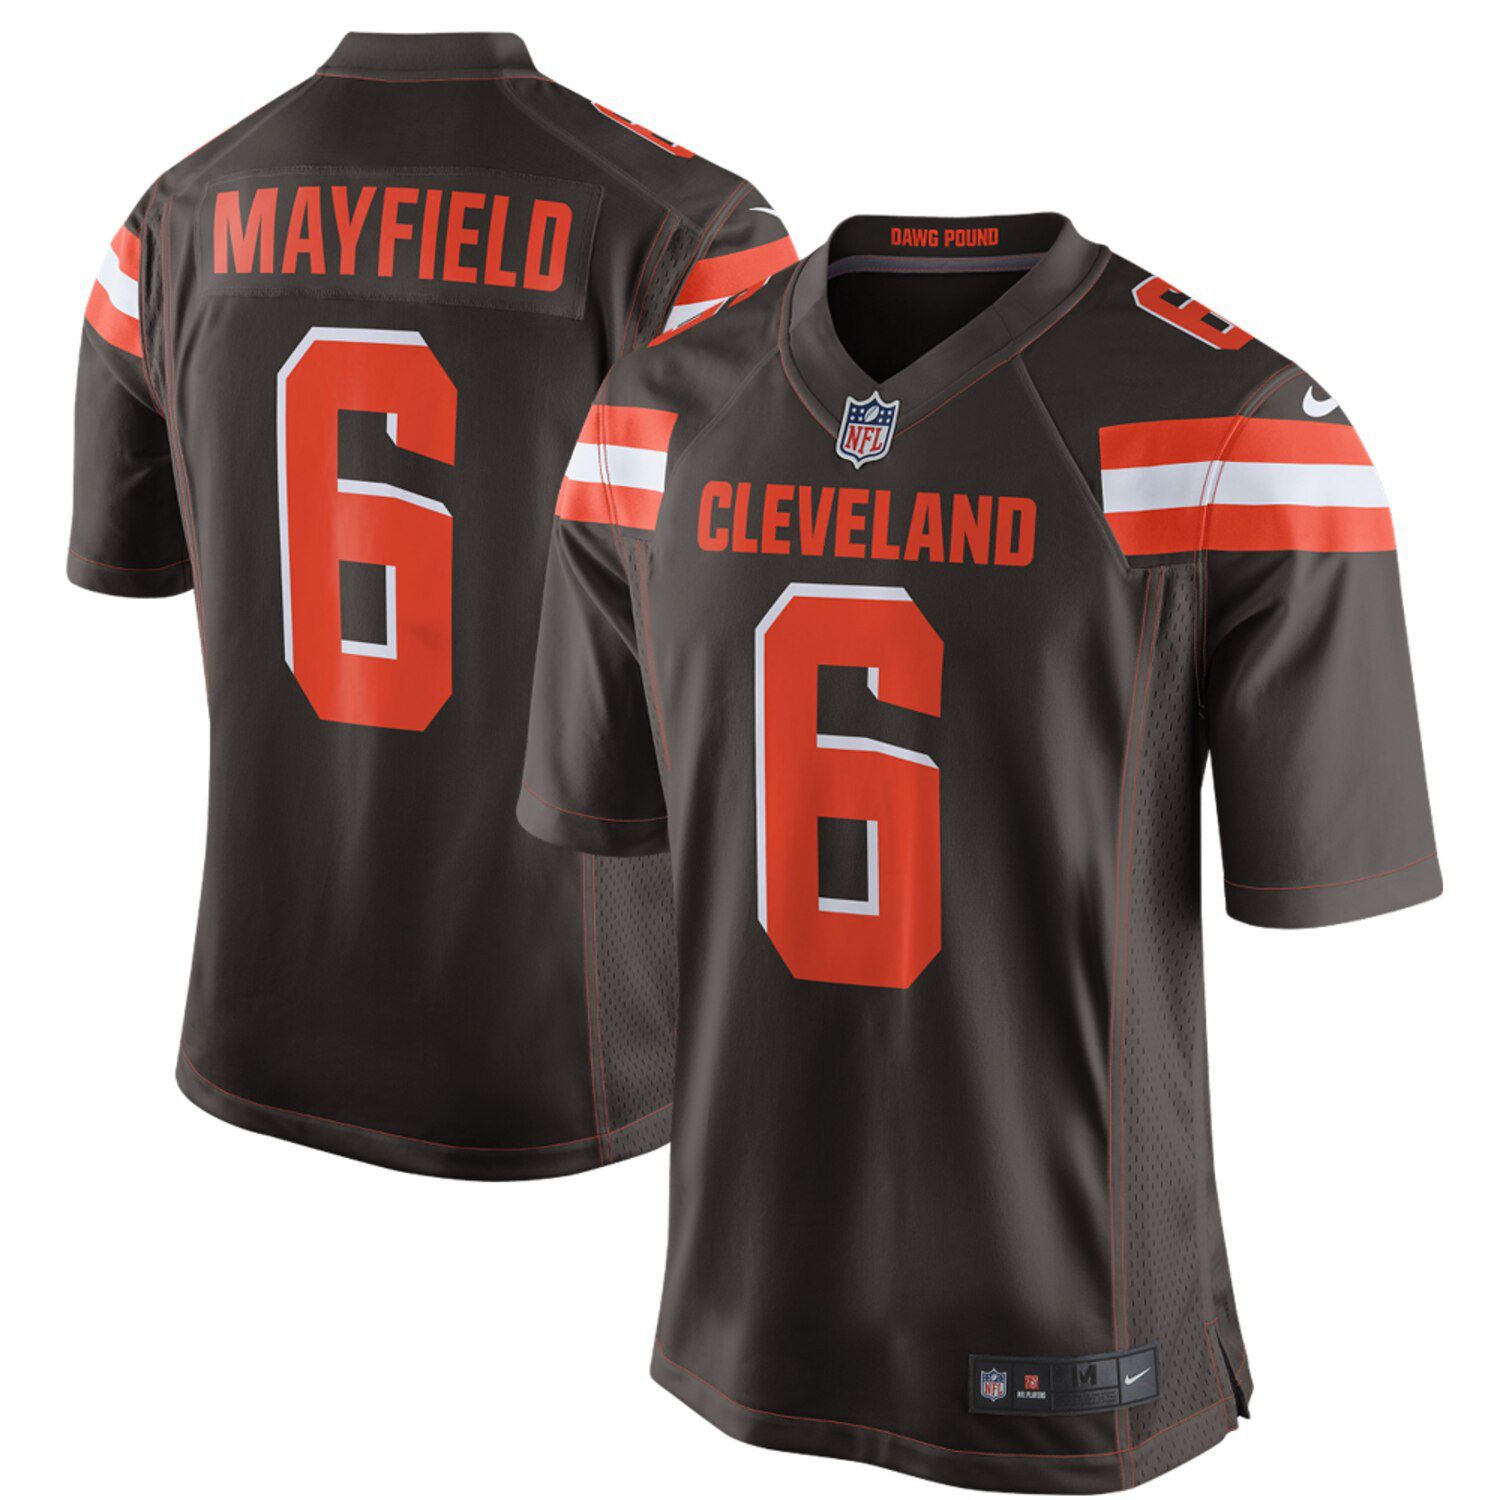 browns jersey camo